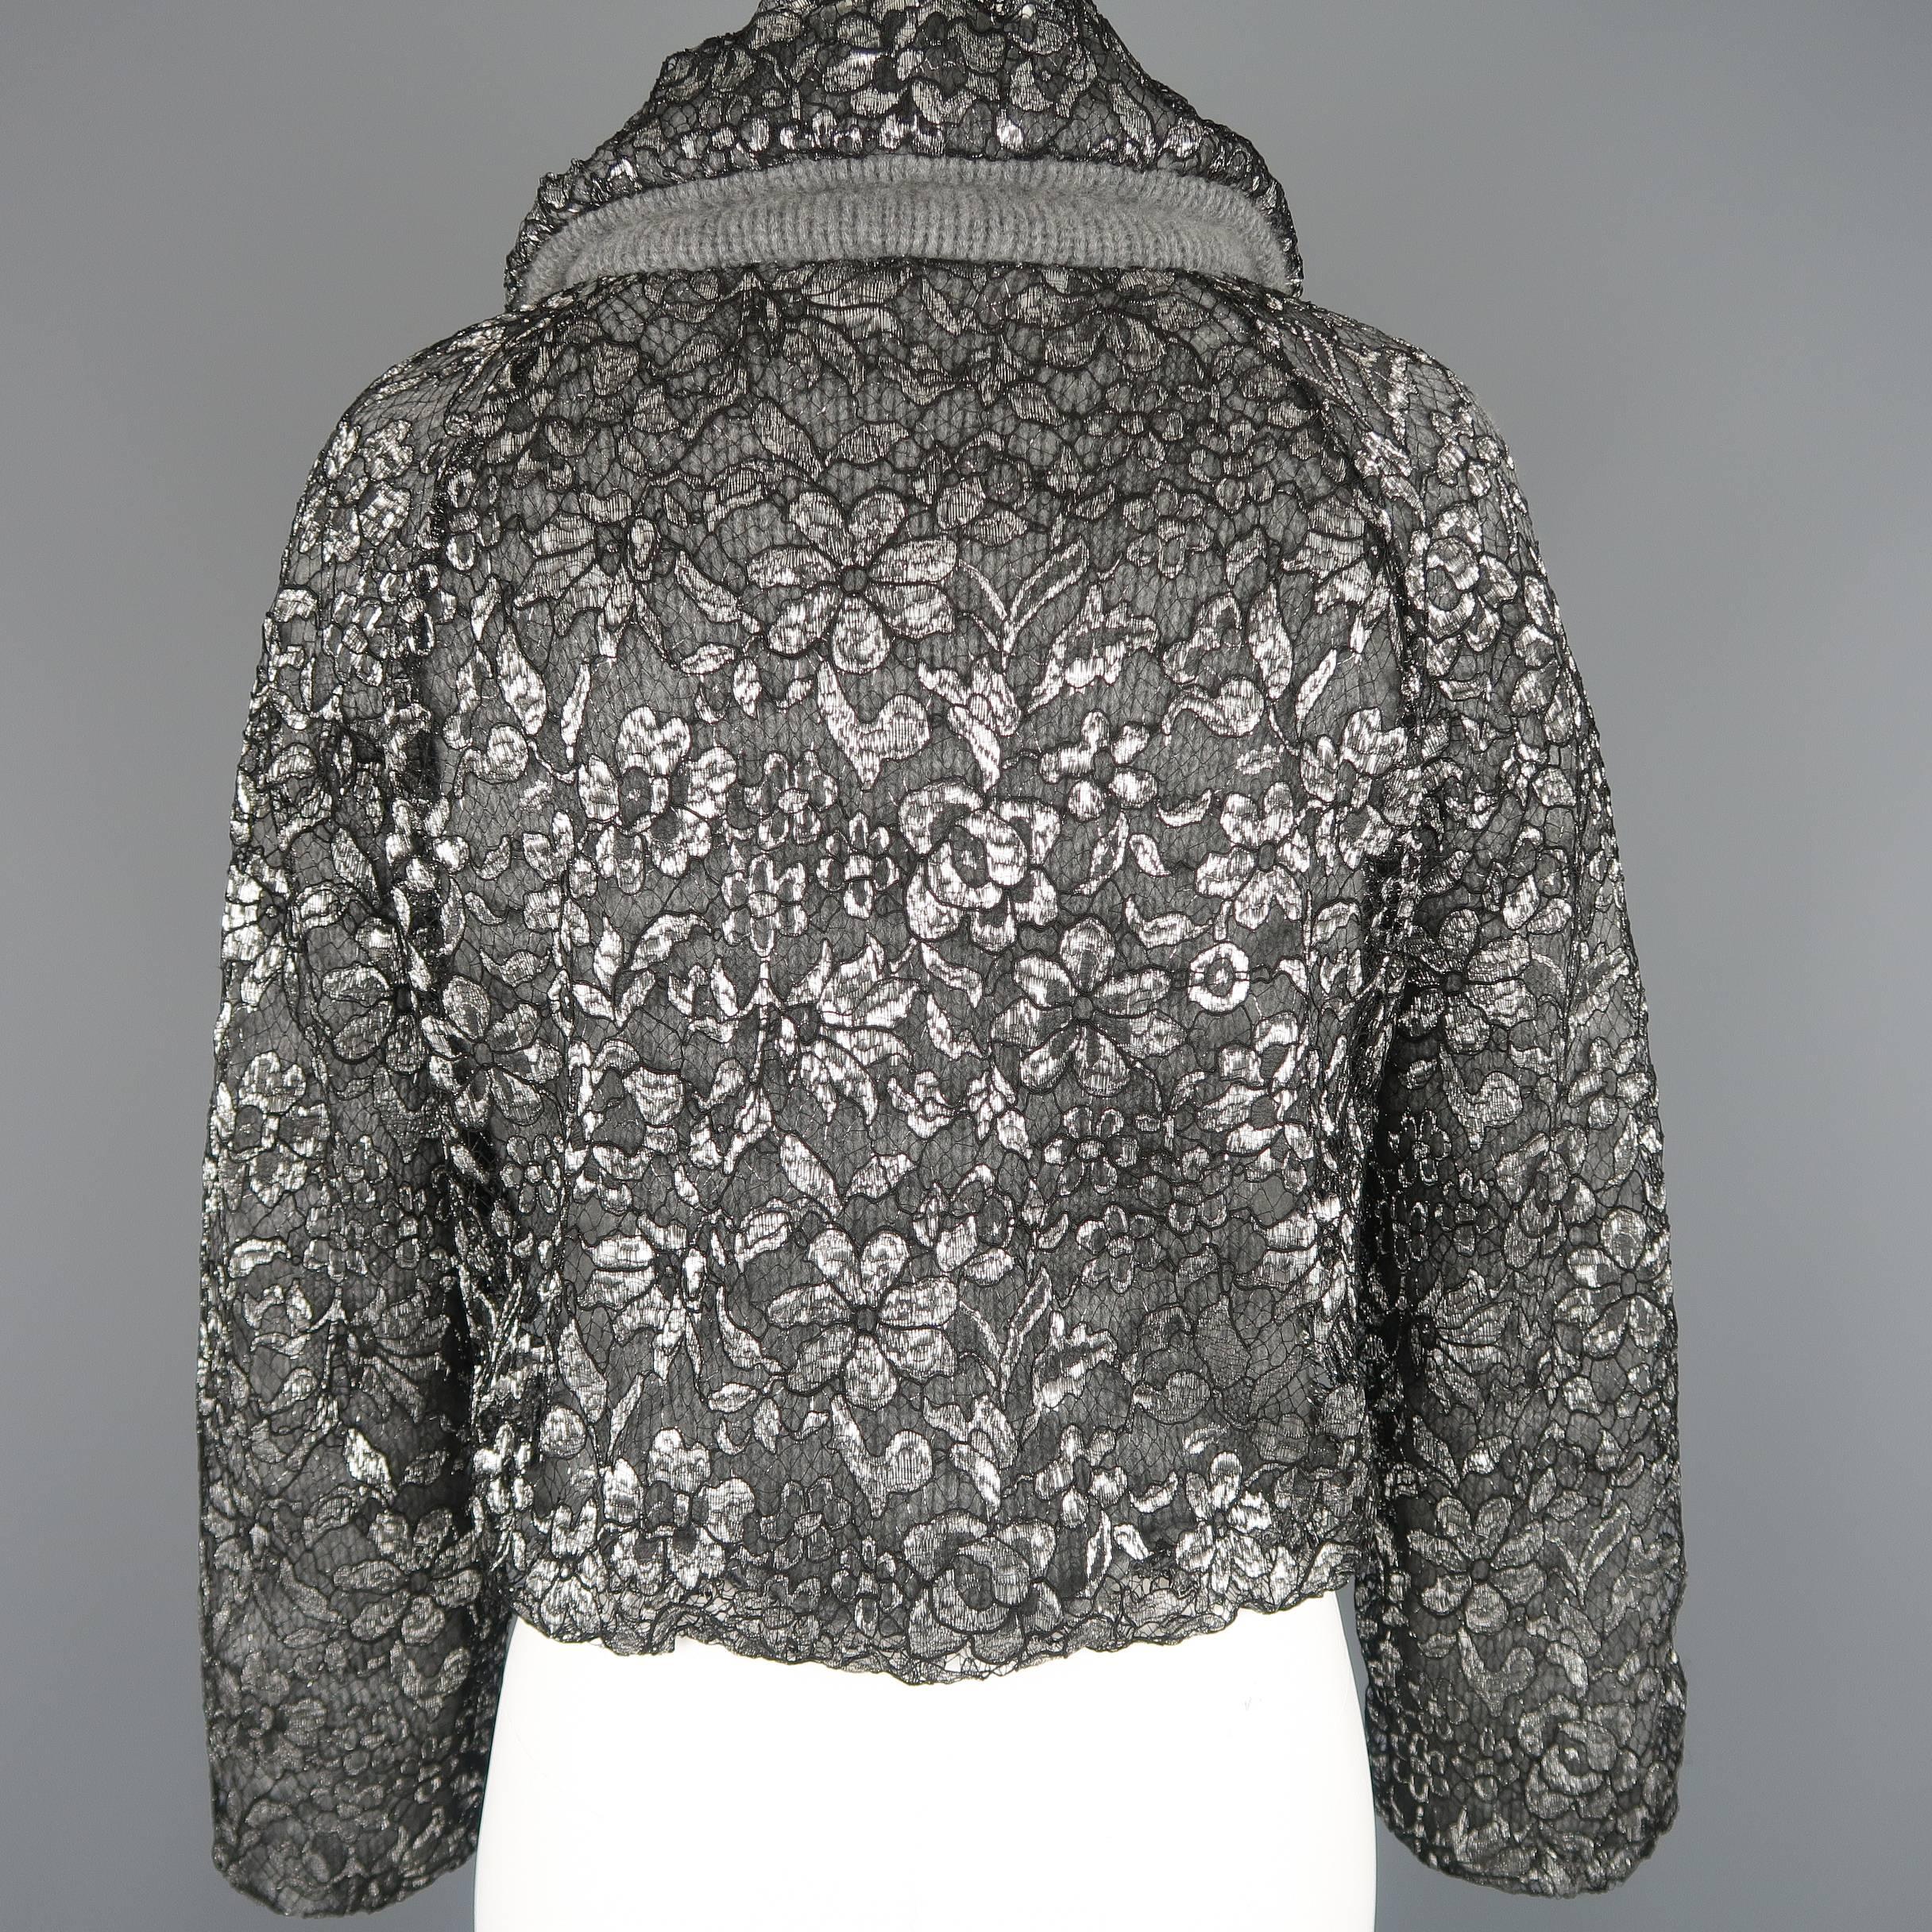 MARC JACOBS Size S Silver Lace Overlay Cashmere Cropped Jacket 2